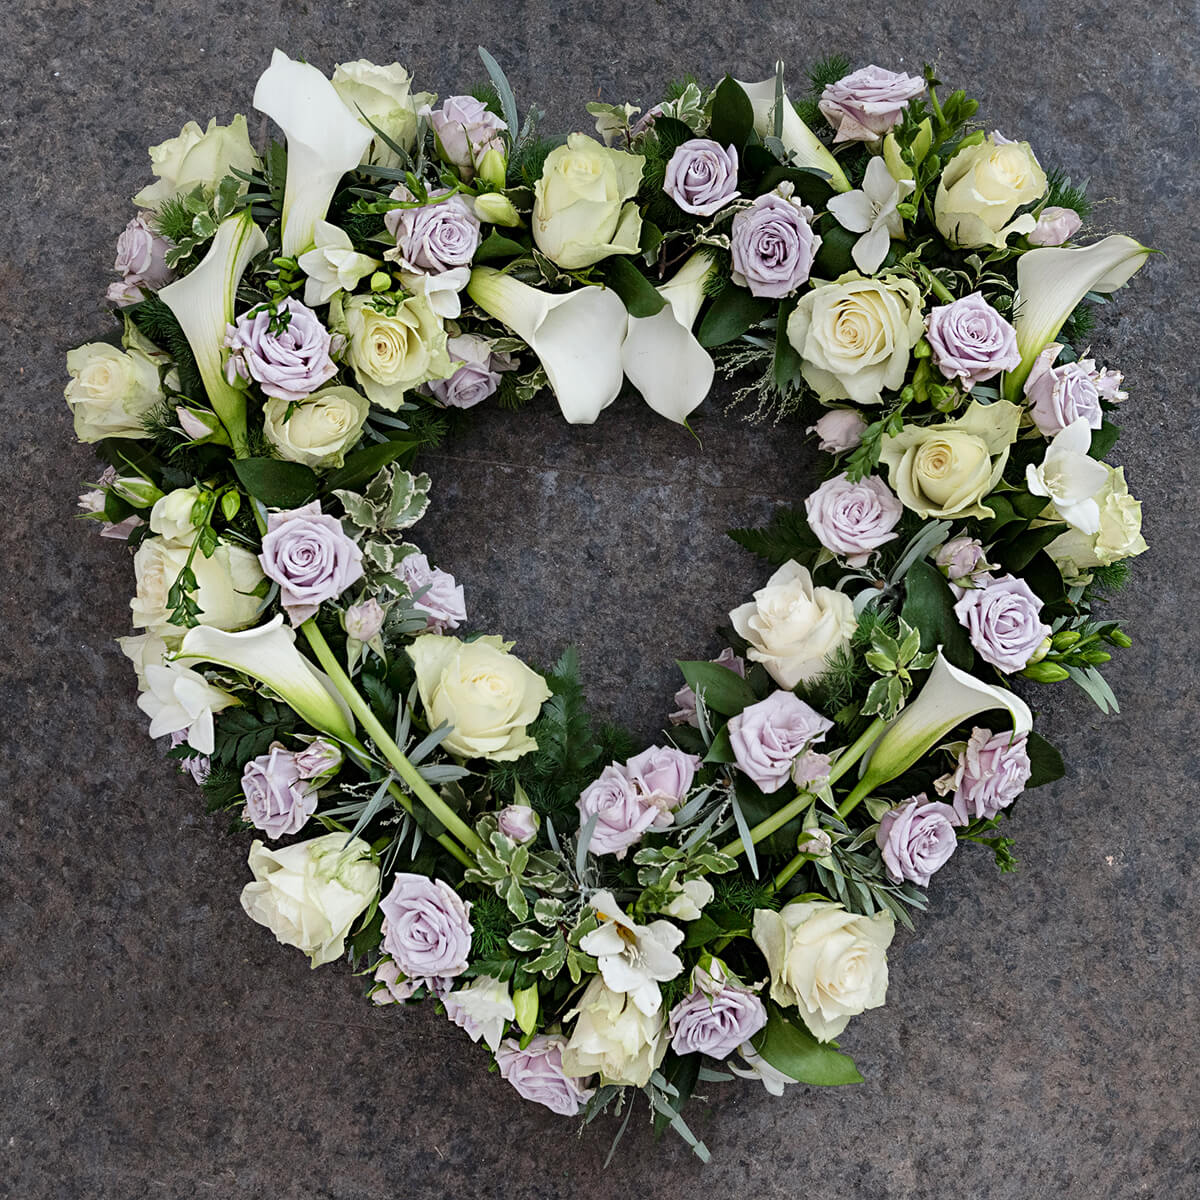 Personal Floral Tributes